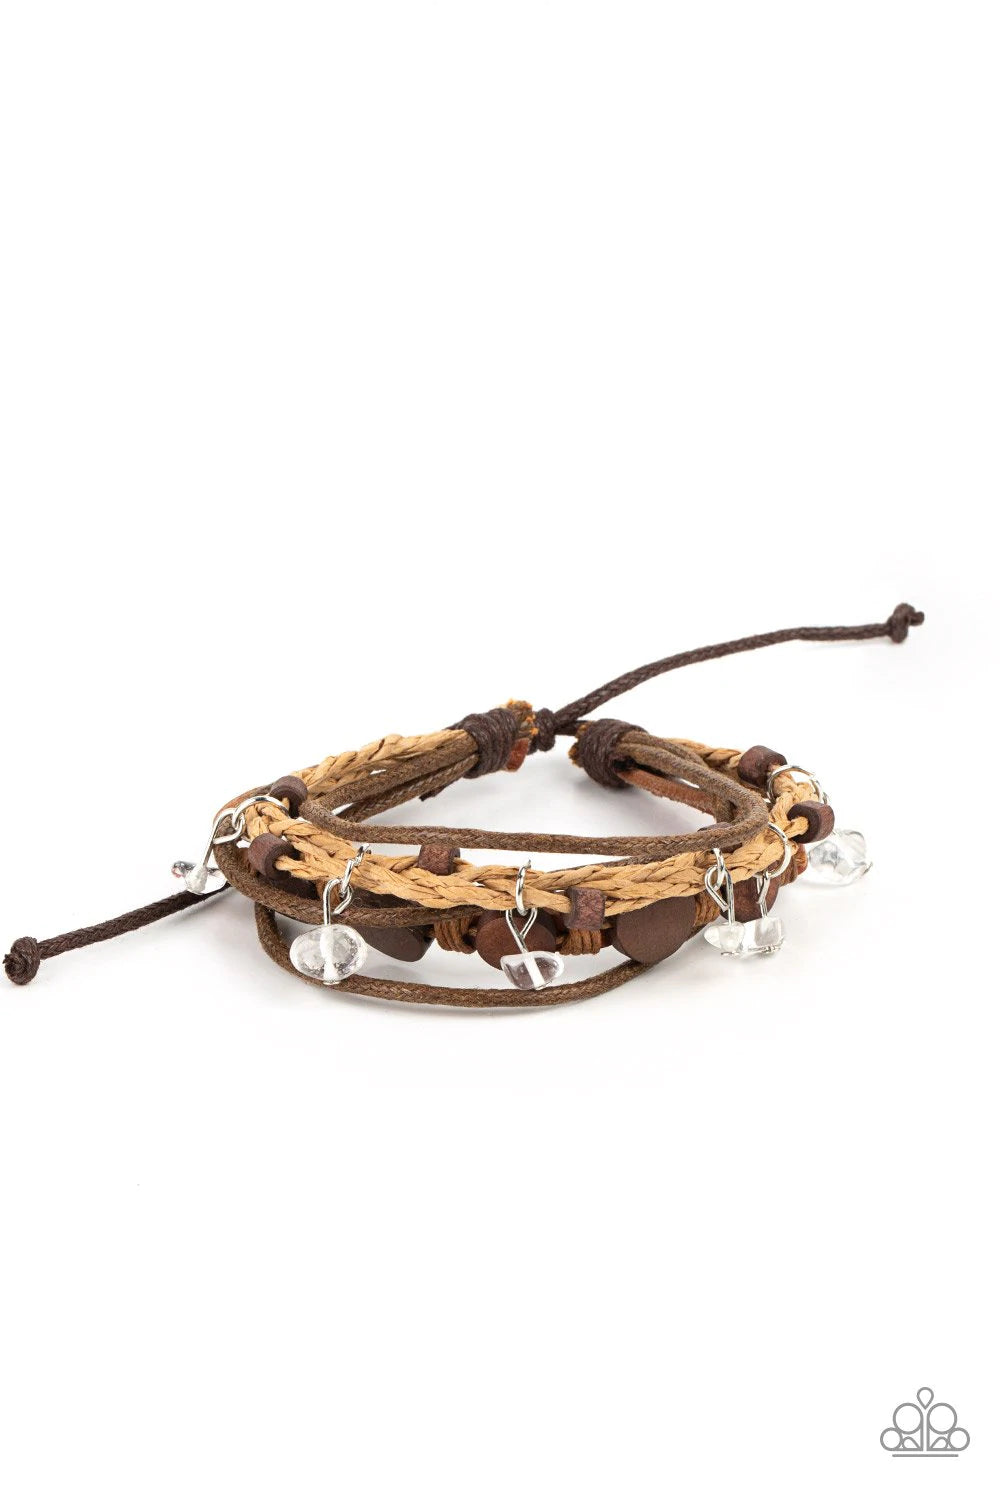 Paparazzi Accessories Run the Rapids - Brown Assorted strands of cording and leather, featuring flat wooden beads and small white polished stones dangling from silver fittings, layer across the wrist for an earthy handcrafted style. Features an adjustable